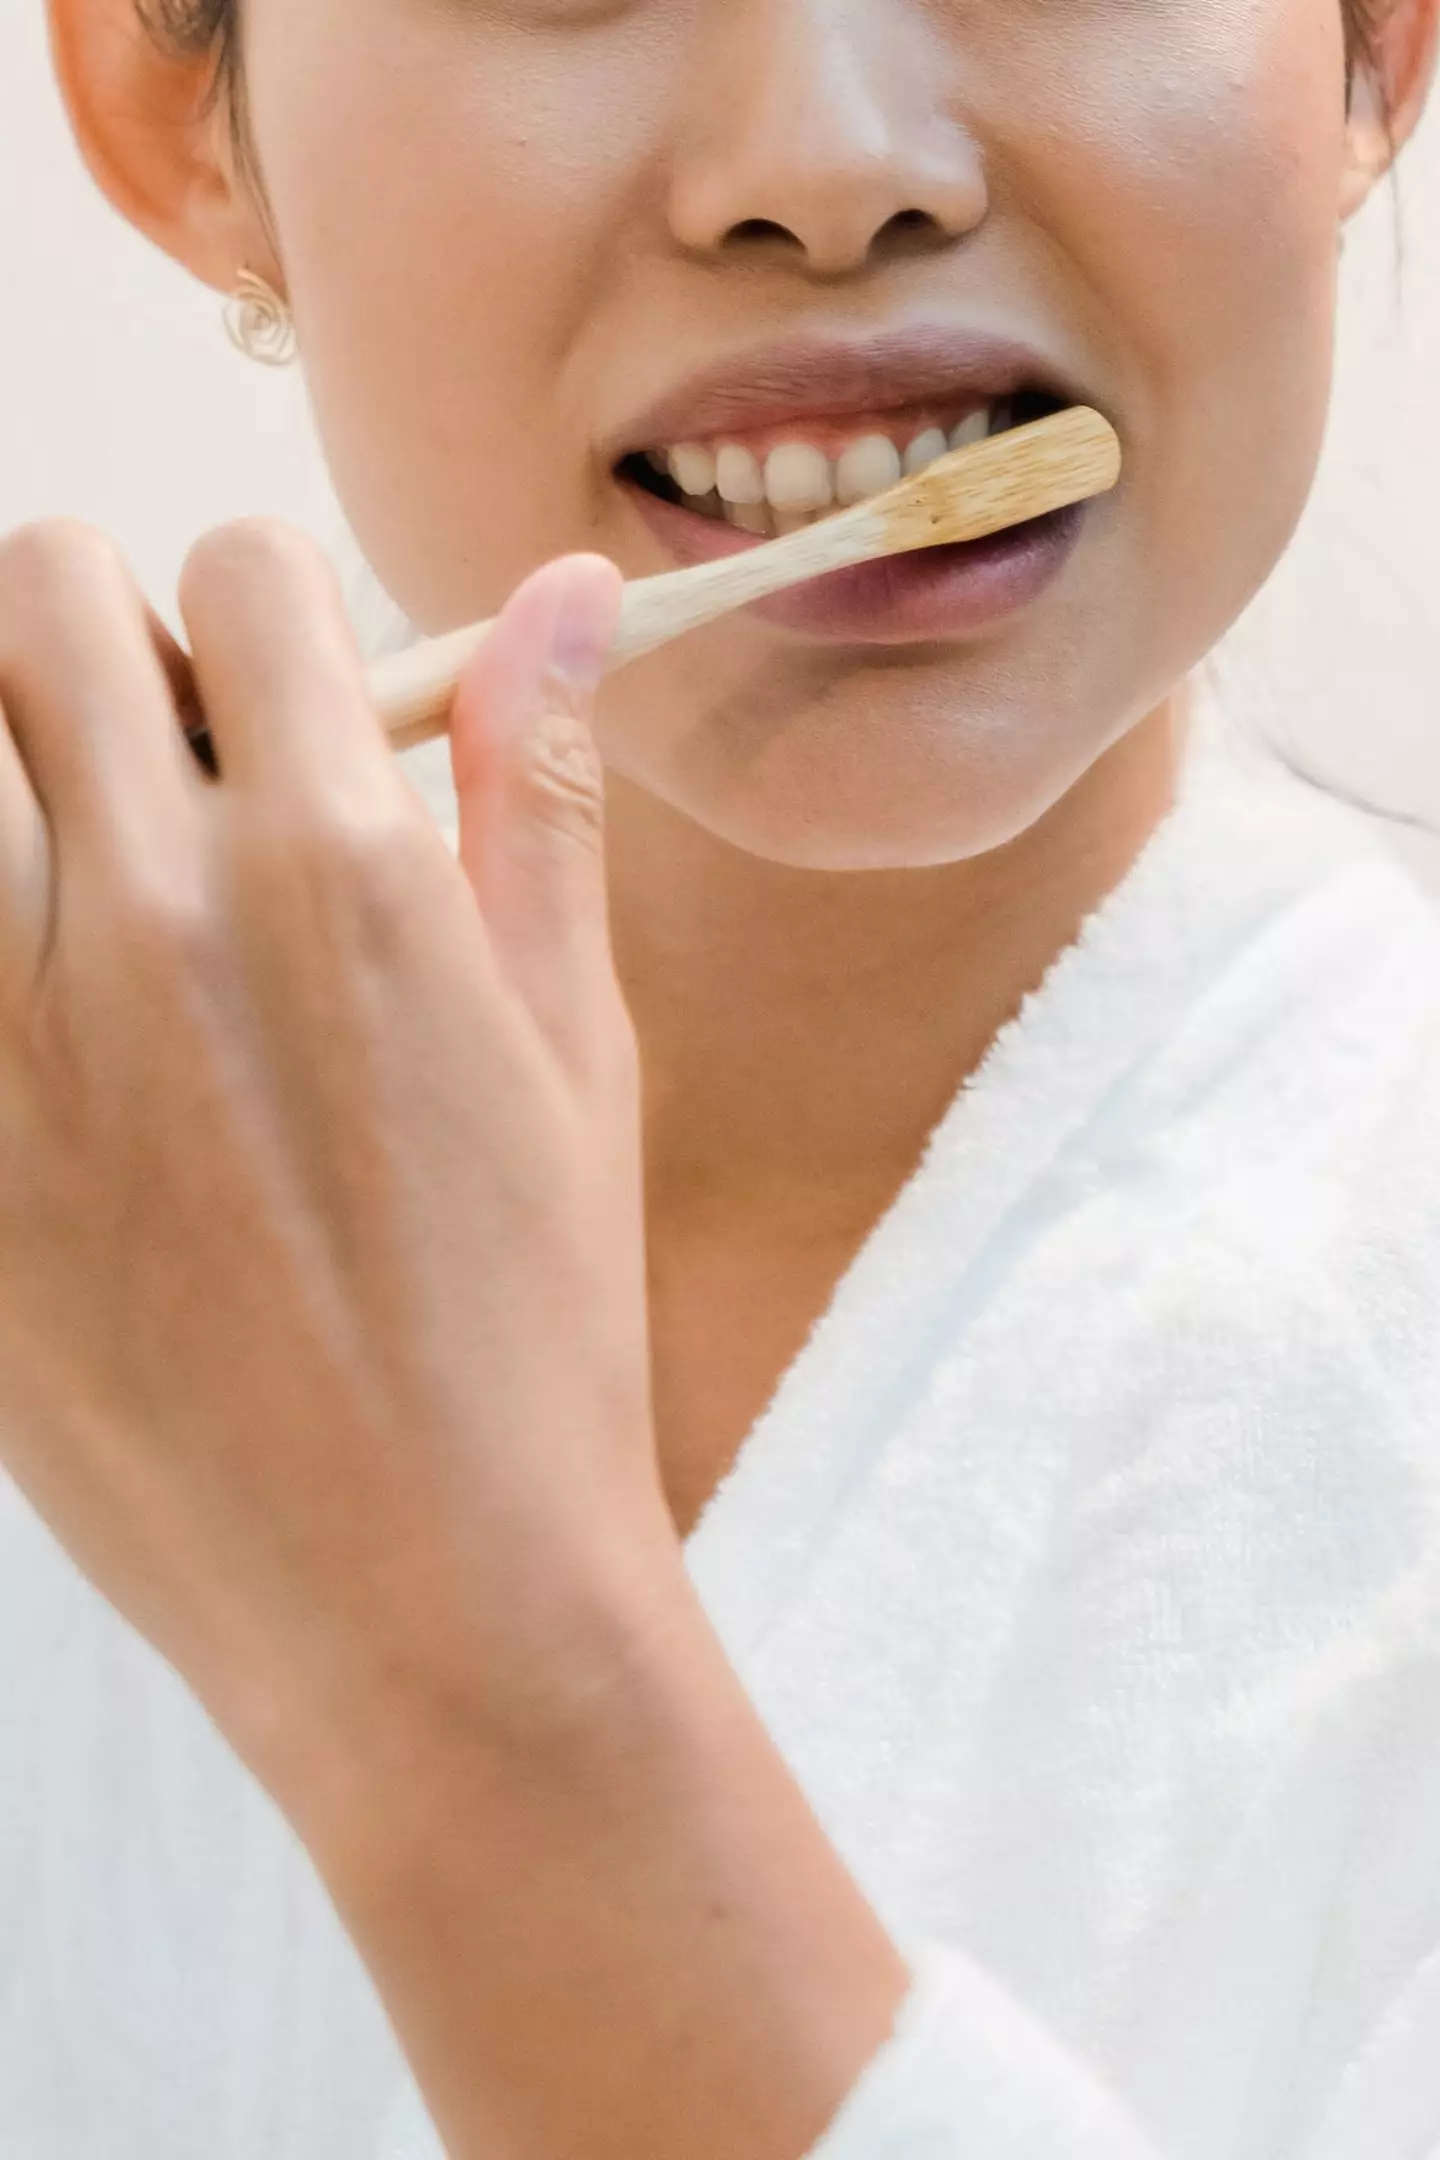 When is it best to brush your teeth in the morning?